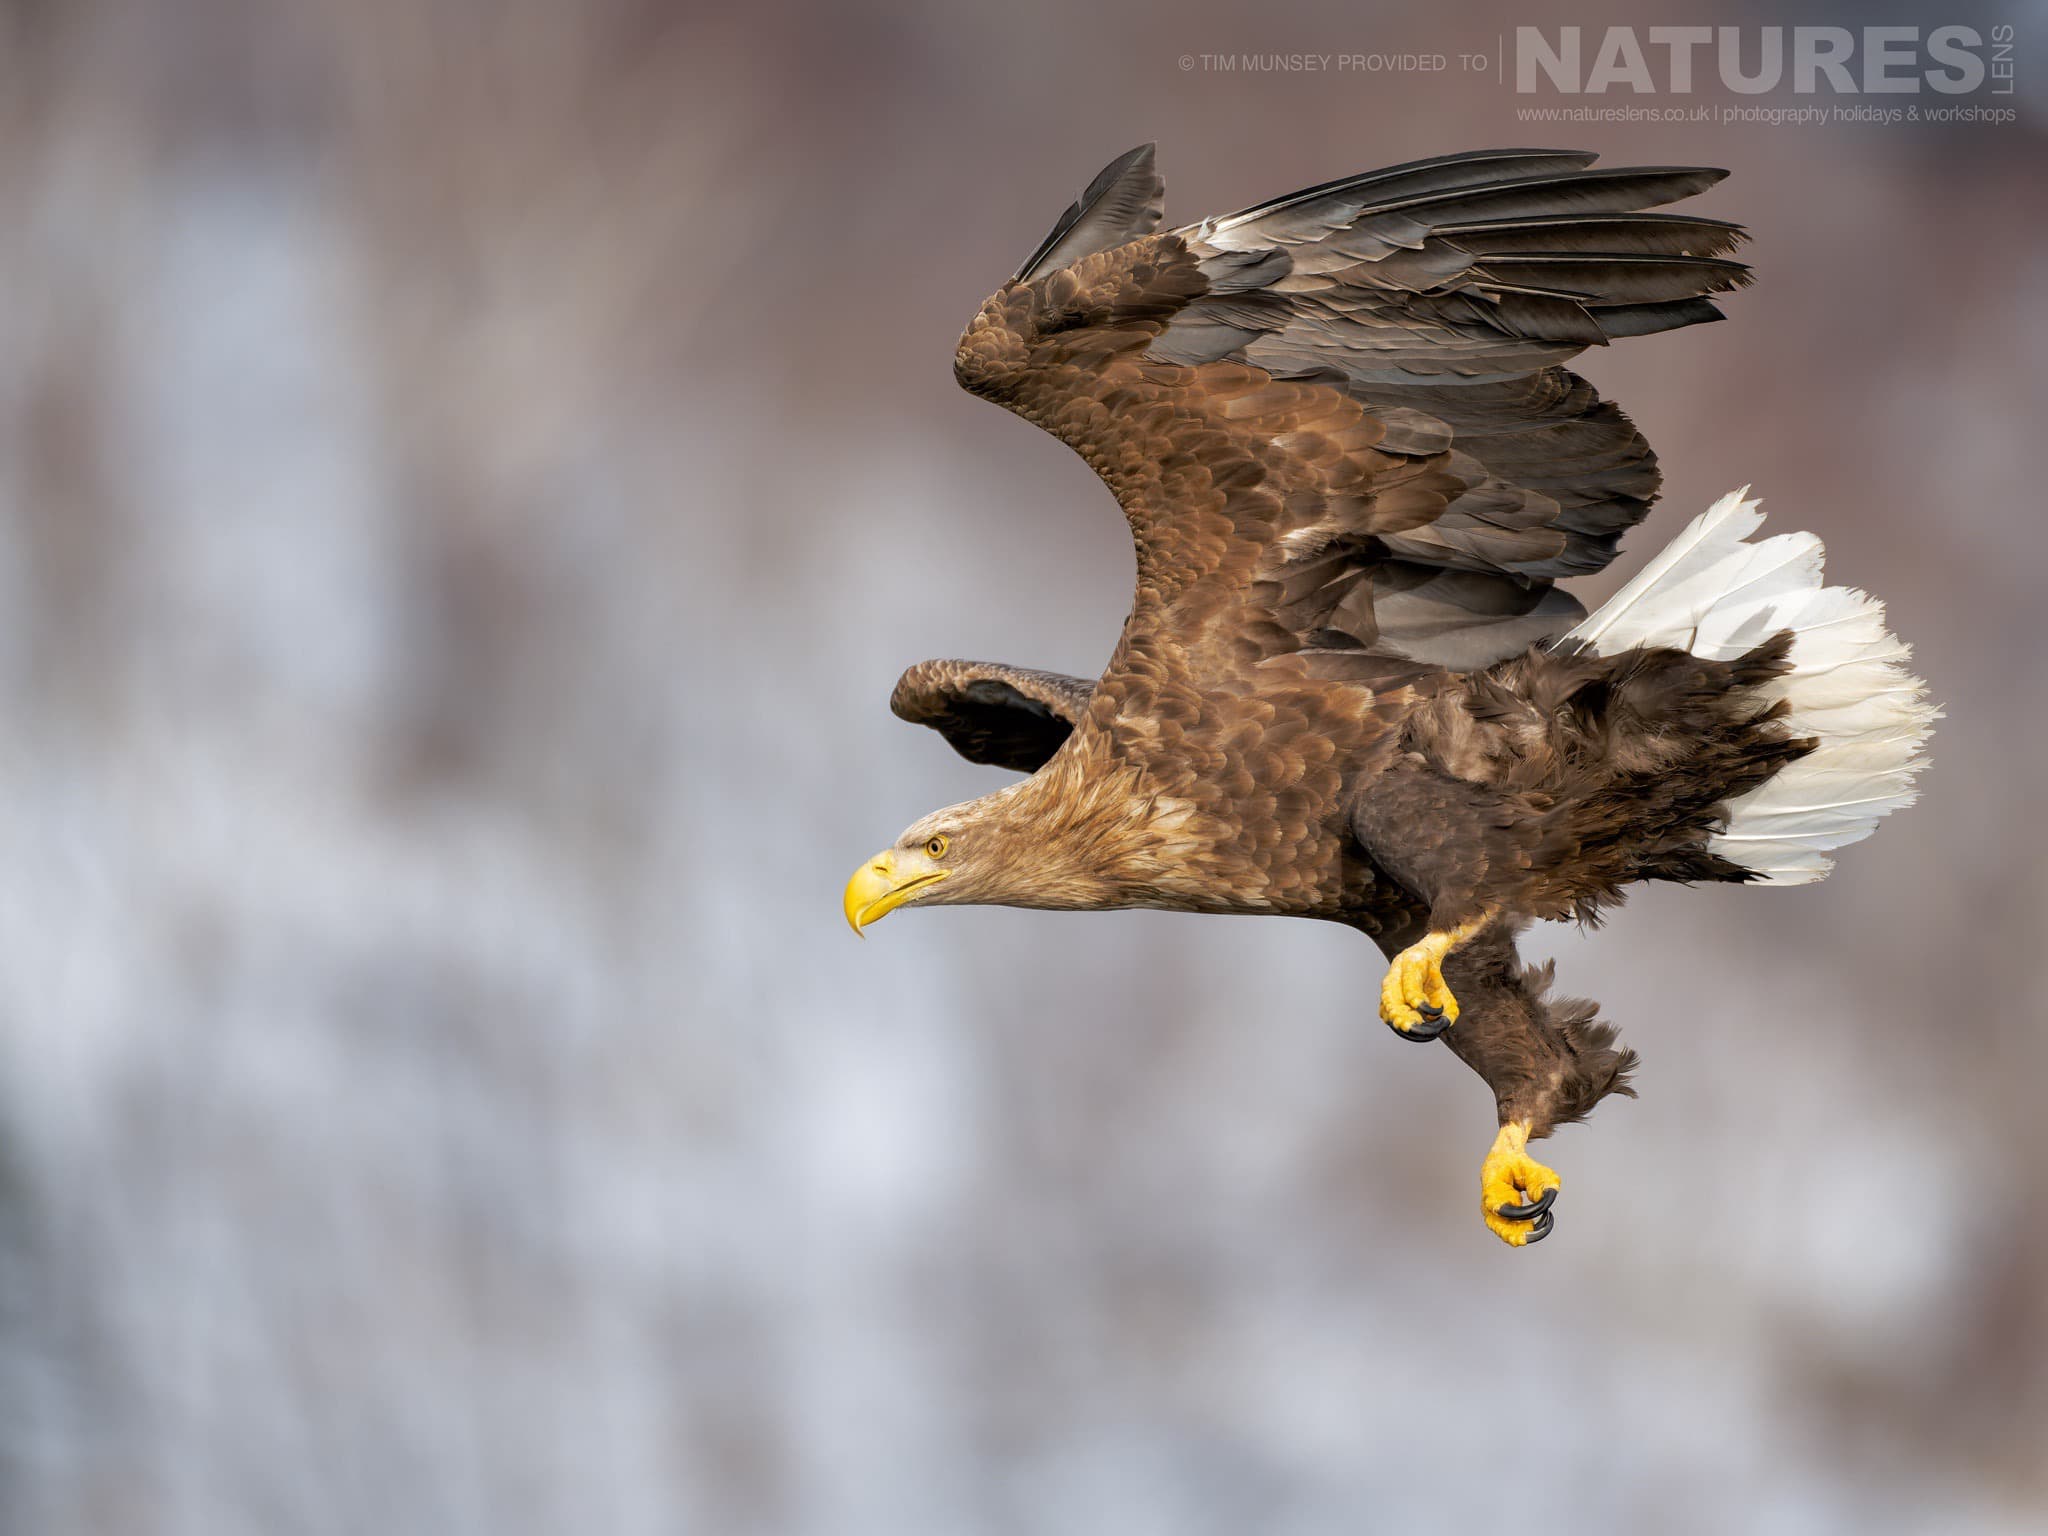 One Of The White Tailed Eagles Of Hokkaido In A Dive One Of The Species Featured During Our Japan's Winter Wildlife Photography Holiday